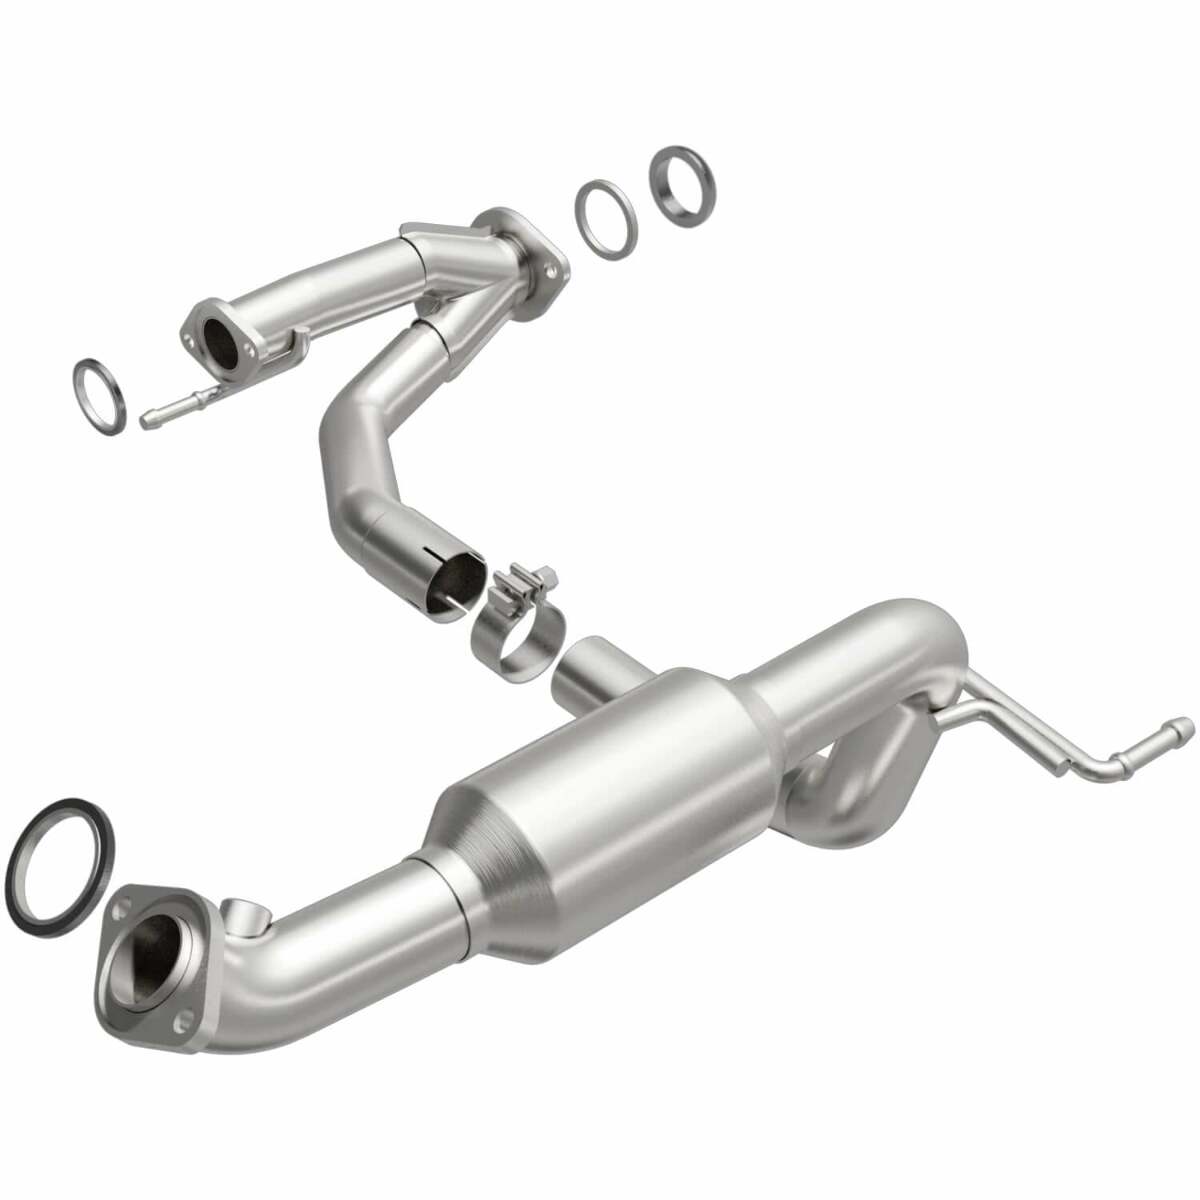 2005-2011 Toyota Tacoma 4.0L Direct-Fit Catalytic Converter 5491562 Magnaflow